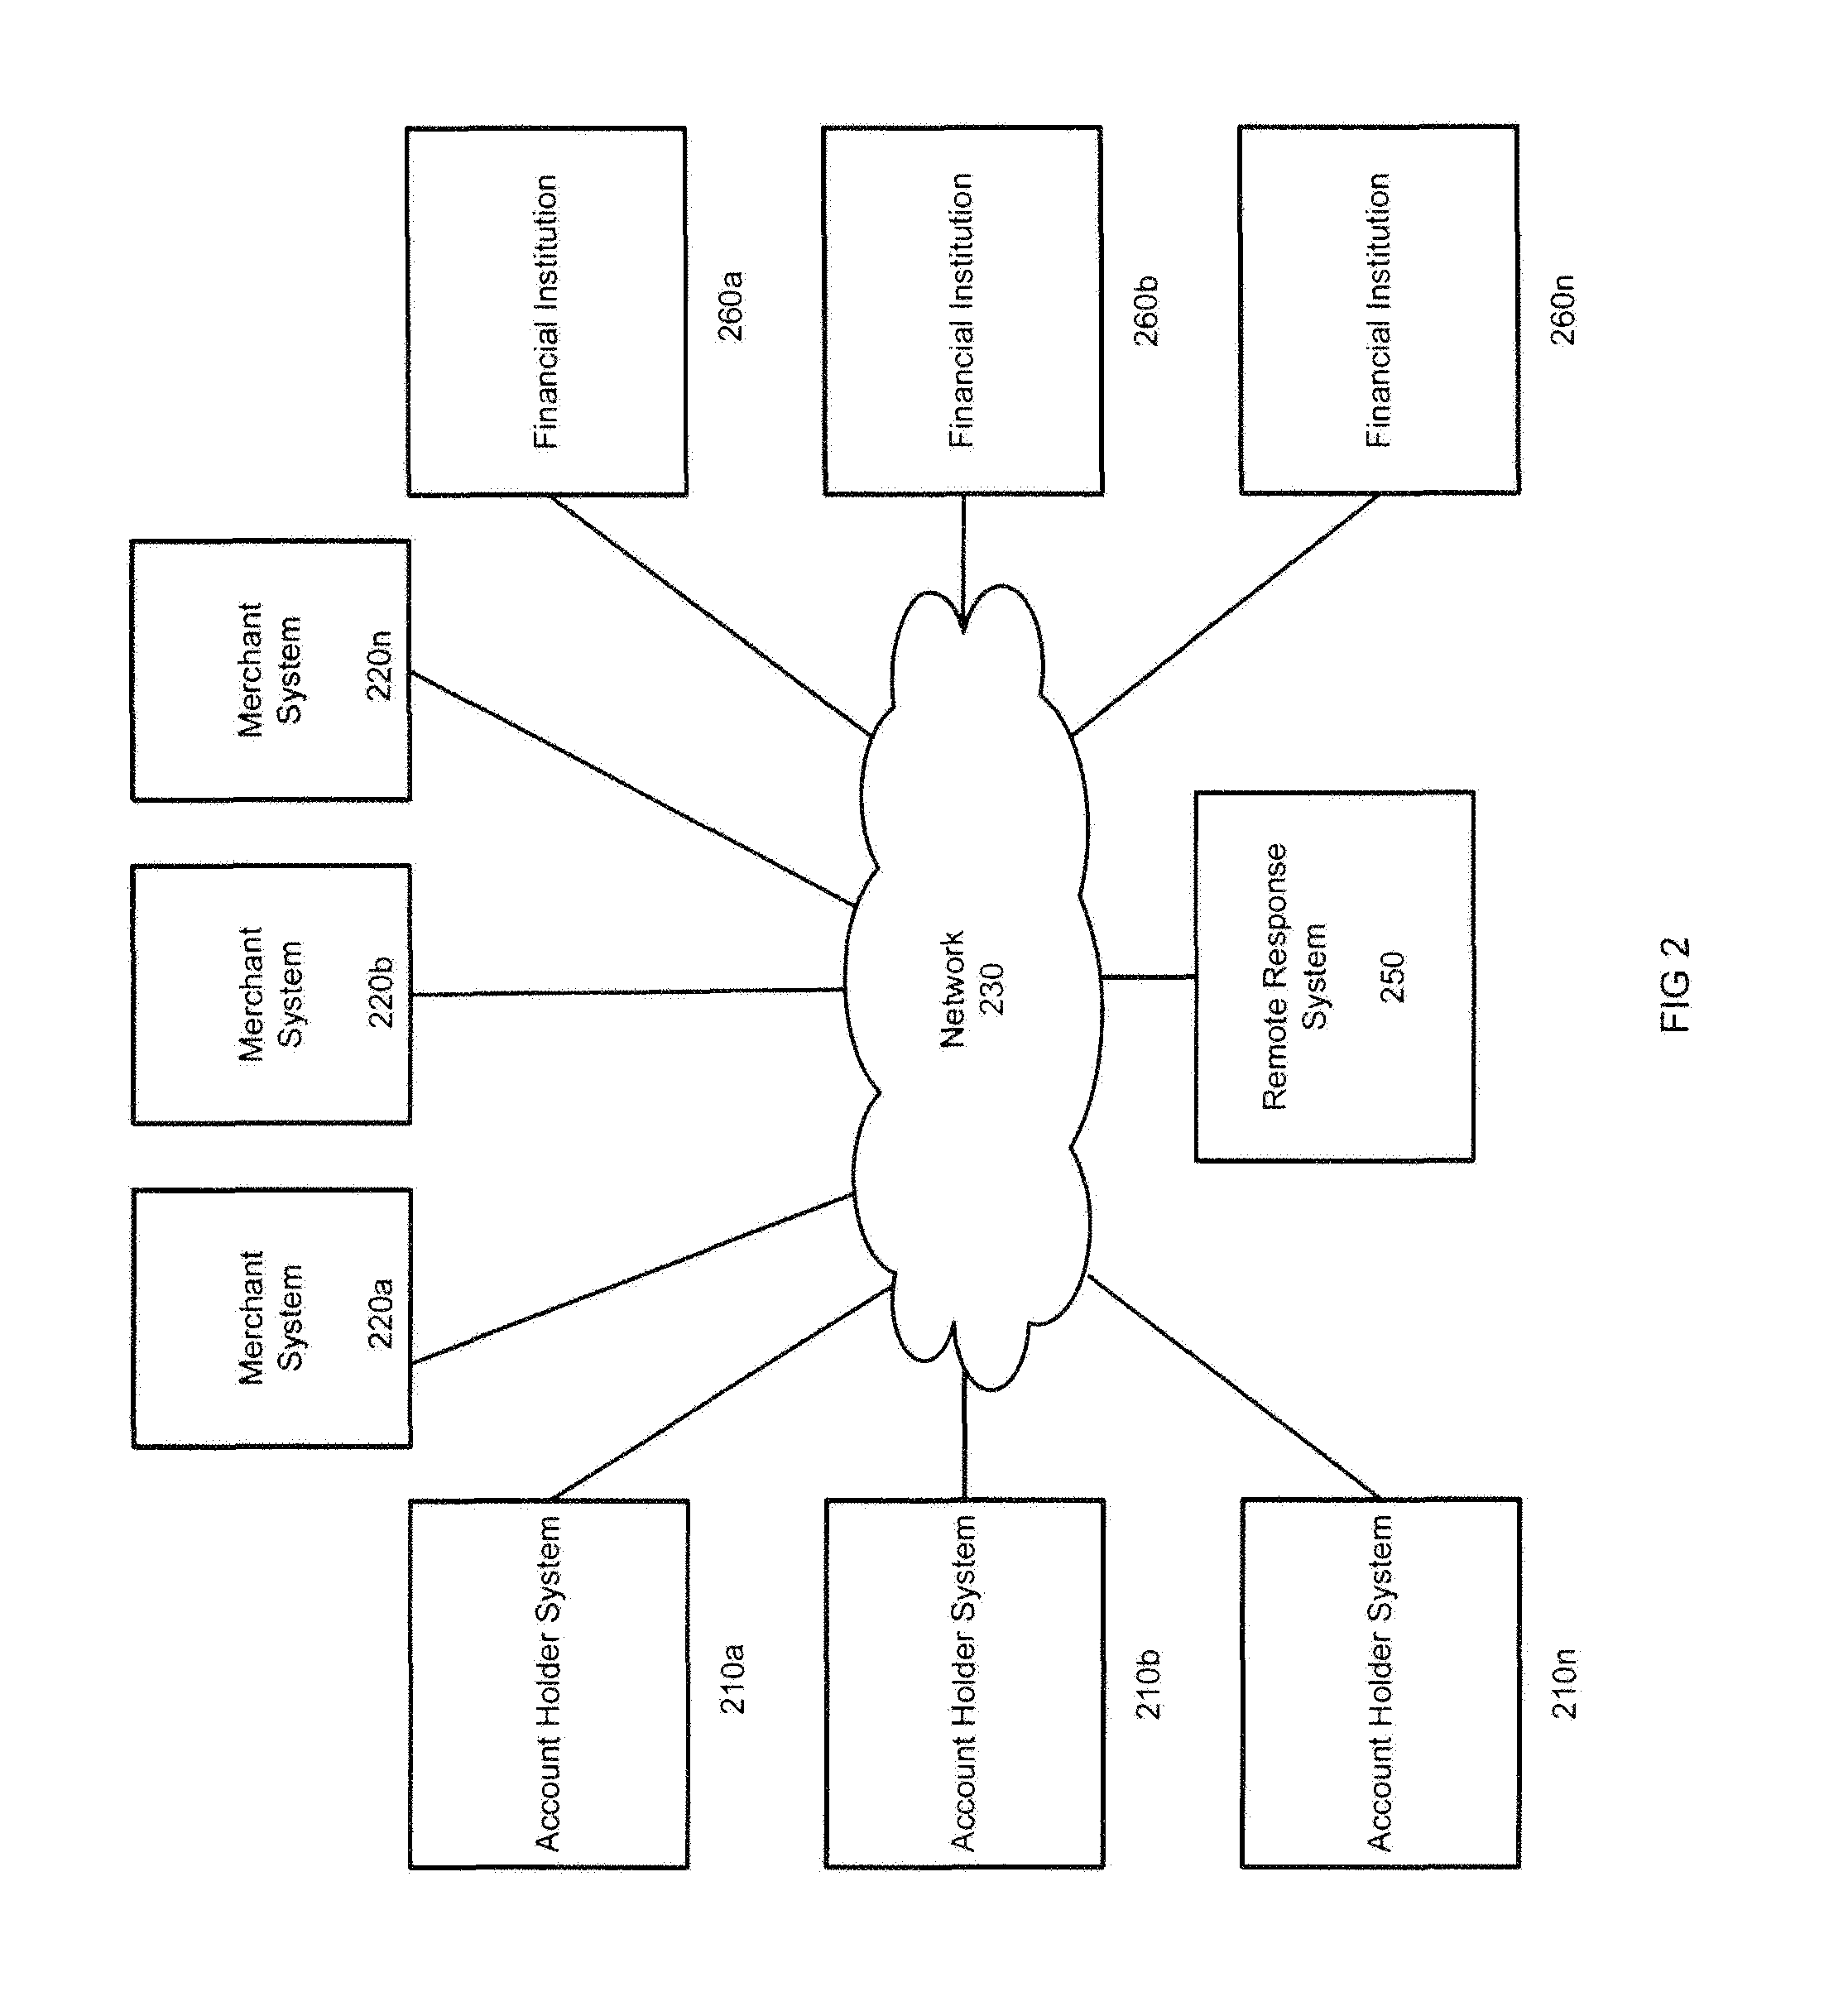 Remote account control system and method